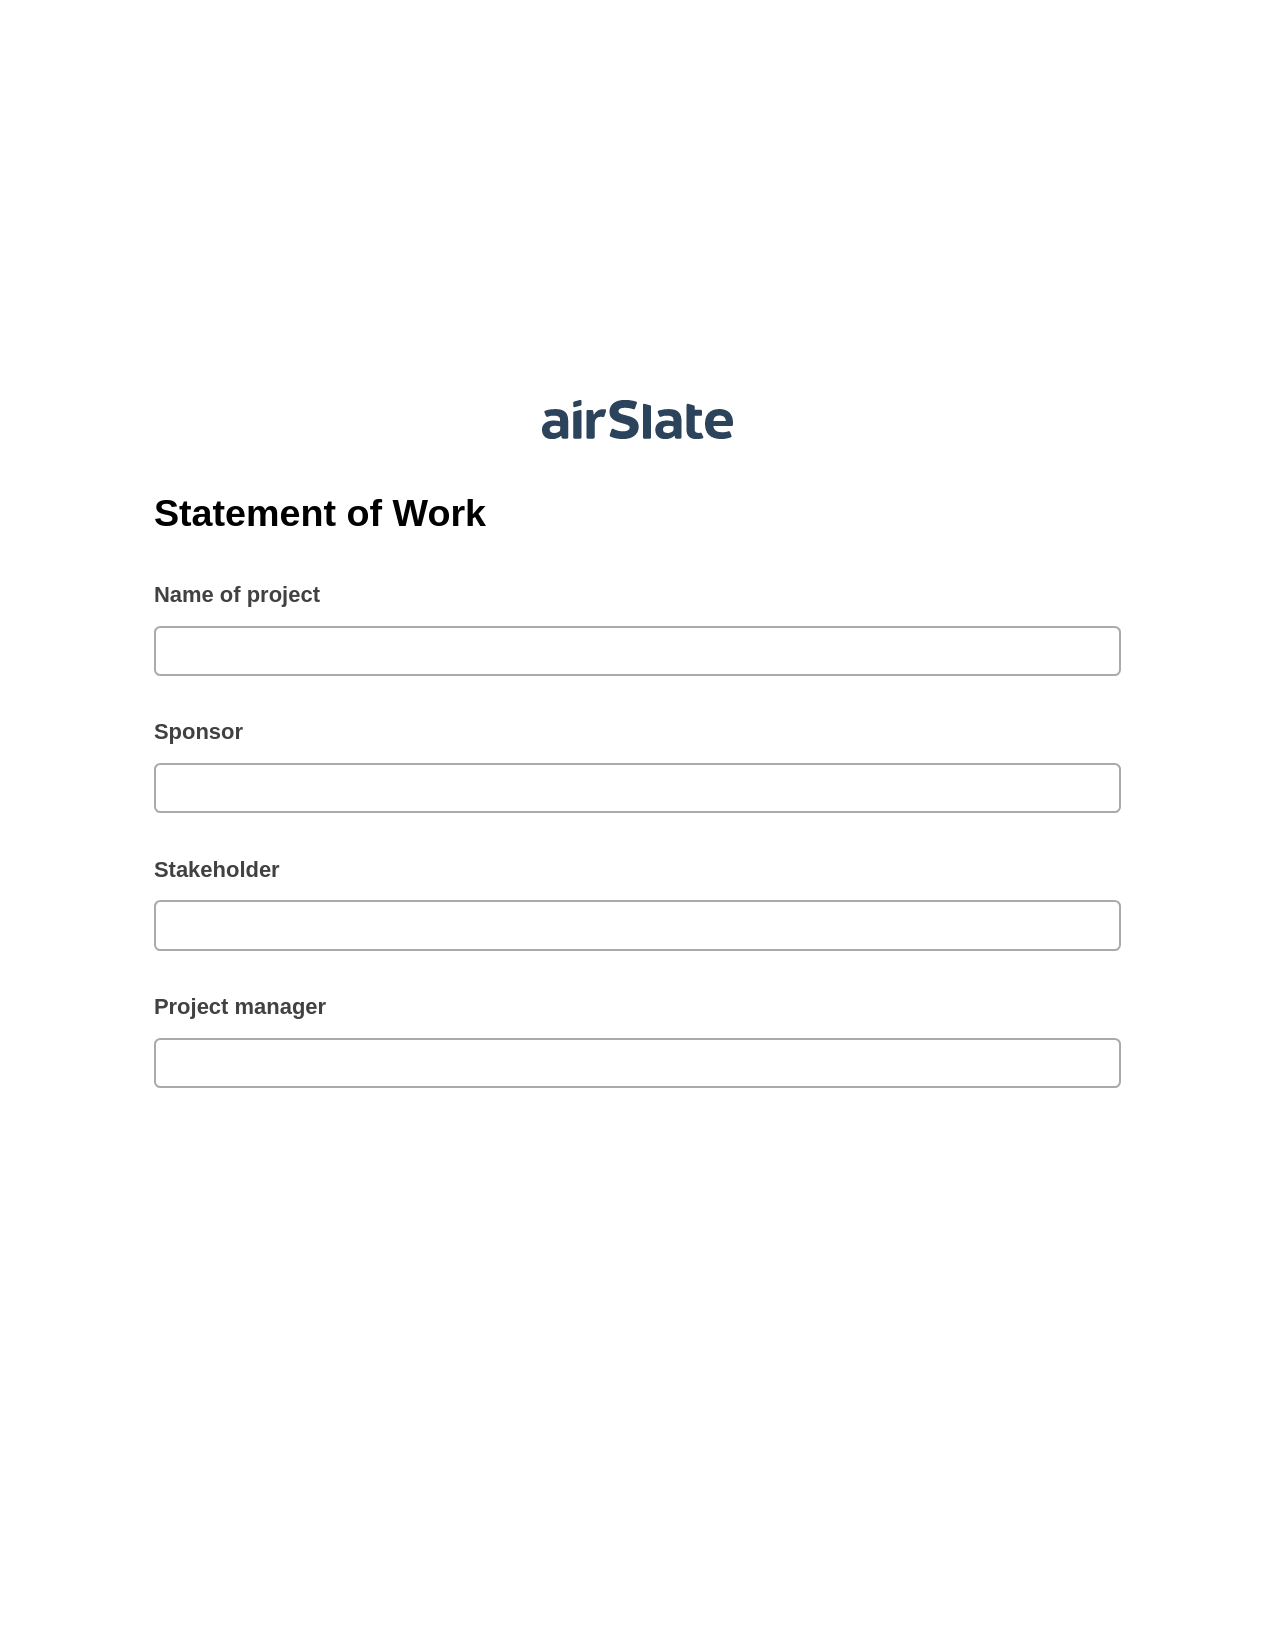 Statement of Work Pre-fill from another Slate Bot, 1Create Slate every Google Sheet Update Bot, Export to Smartsheet